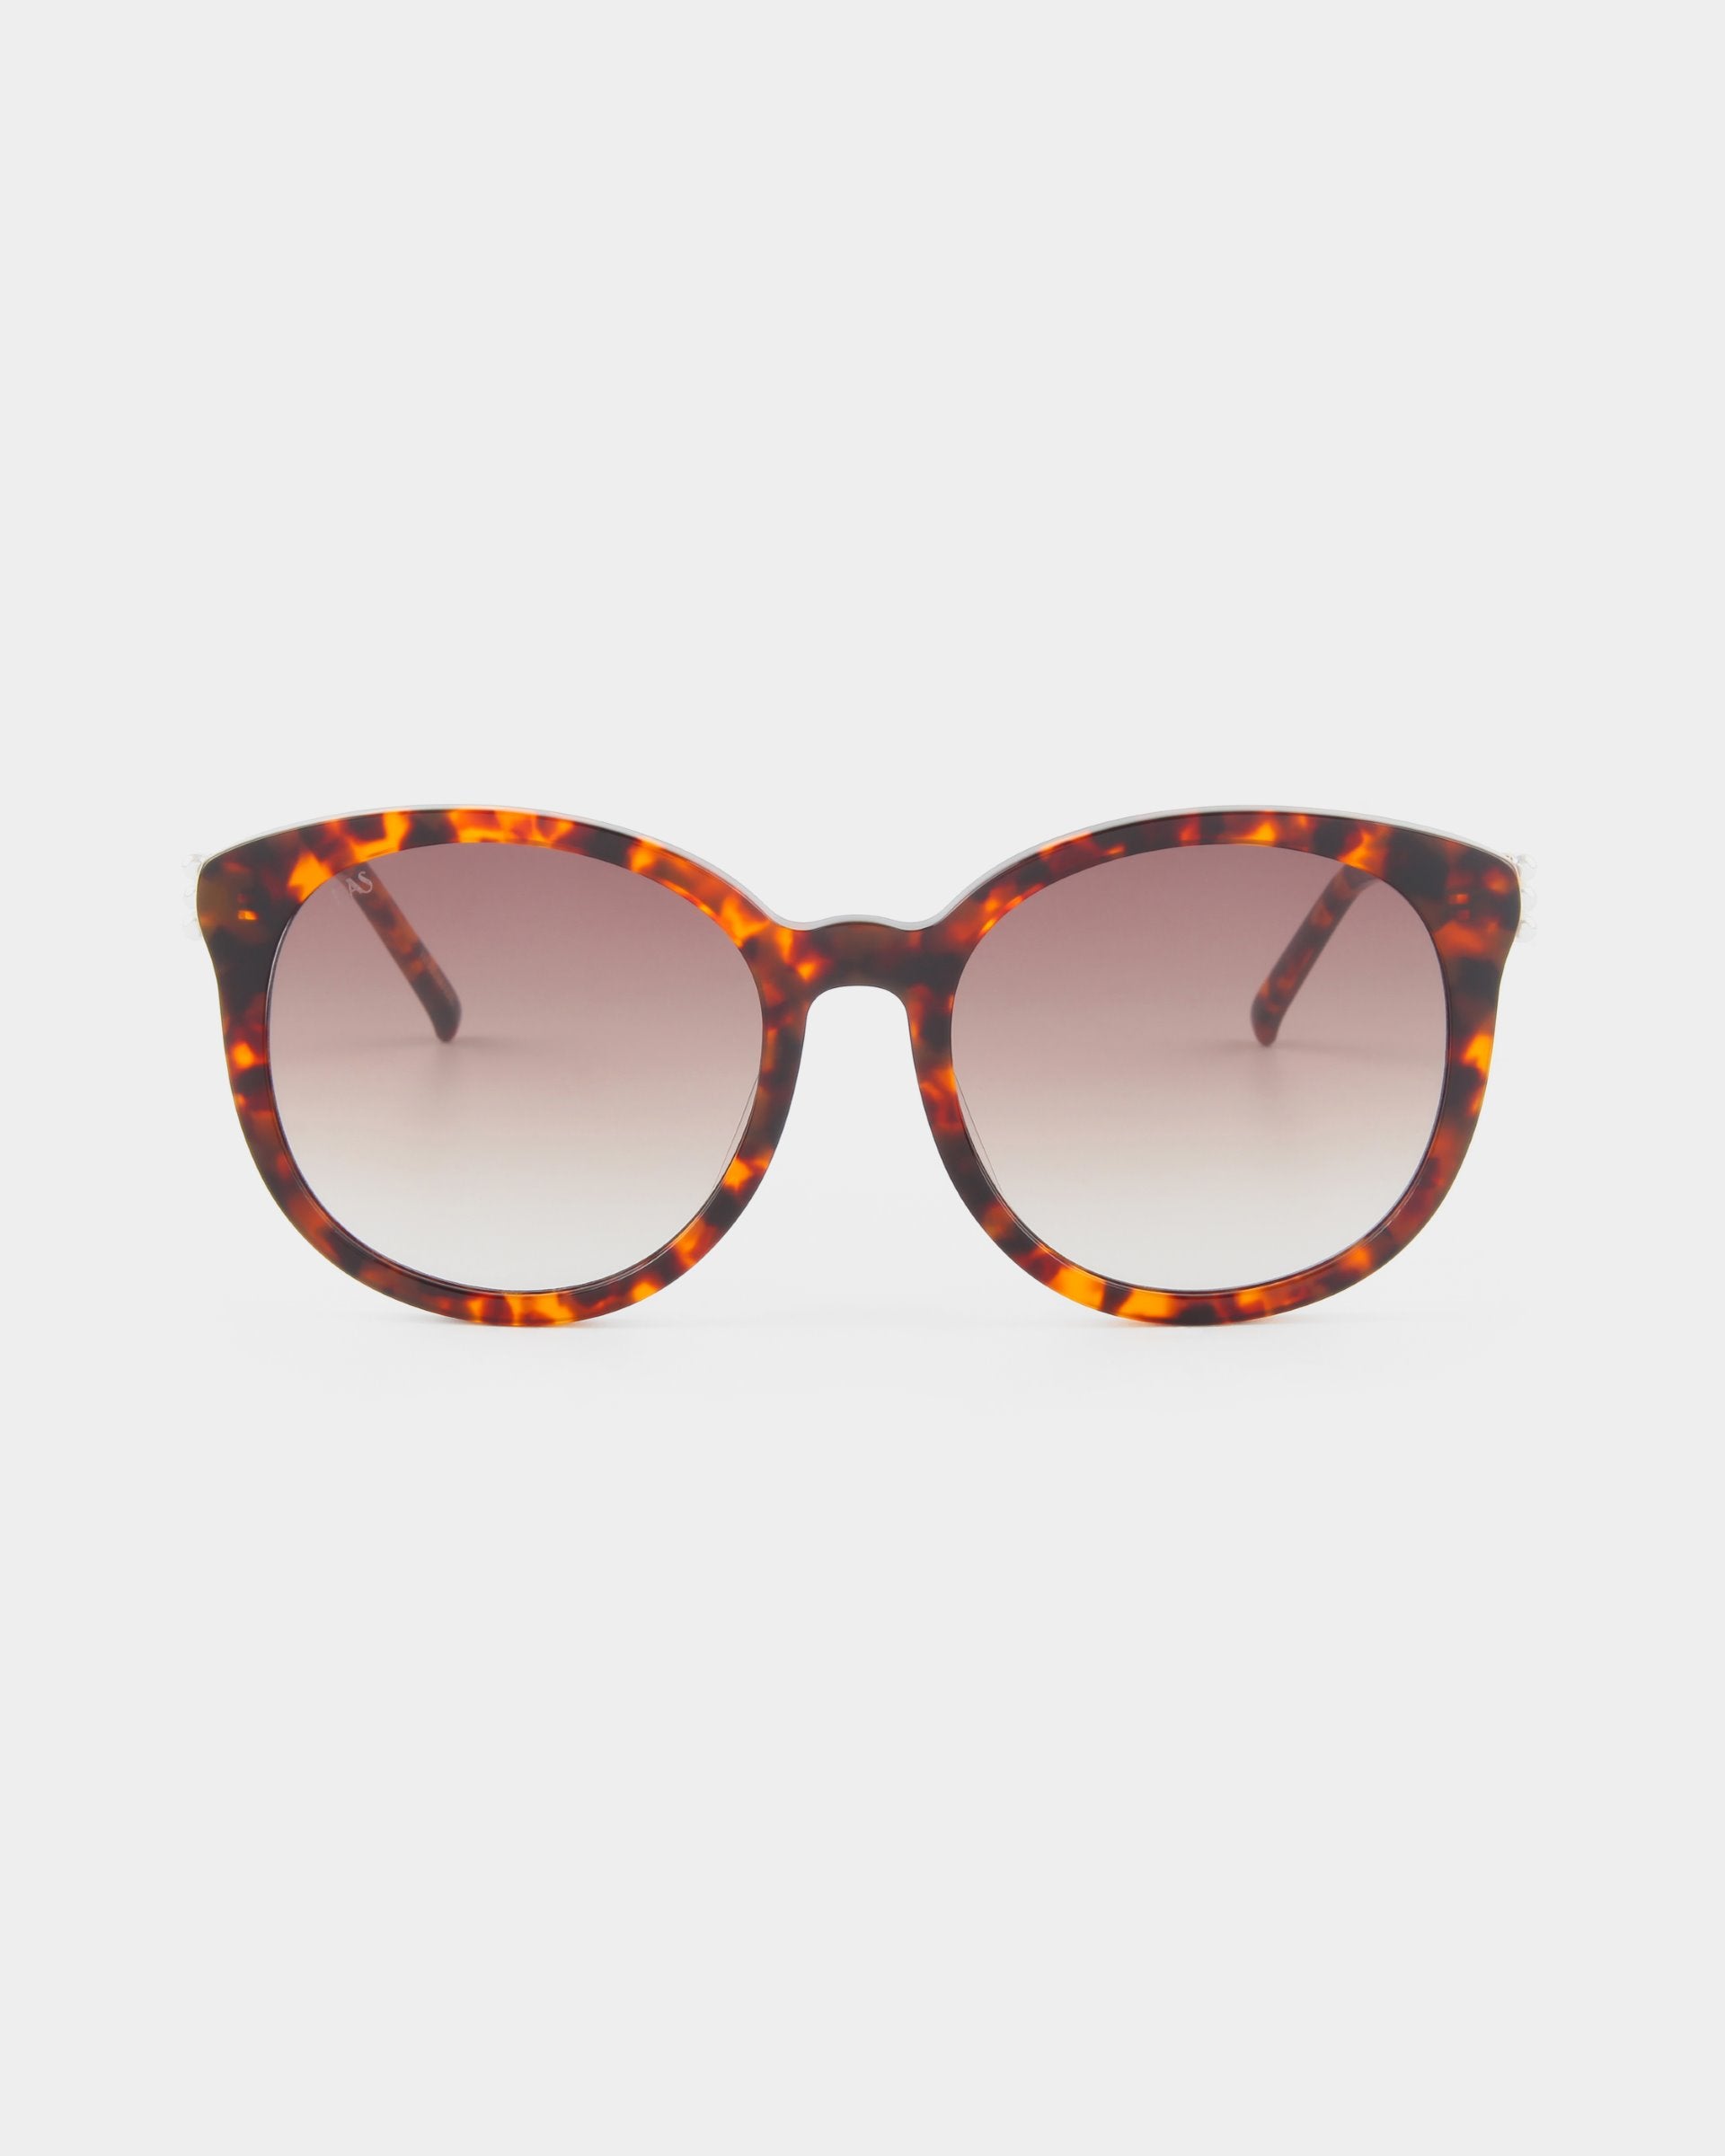 A pair of For Art&#39;s Sake® Scarlett sunglasses with a tortoiseshell patterned frame and round lenses. The ultralightweight shatter-resistant lenses are gradient tinted, transitioning from a darker shade at the top to a lighter shade at the bottom and offering 100% UVA &amp; UVB protection. The background is plain white.